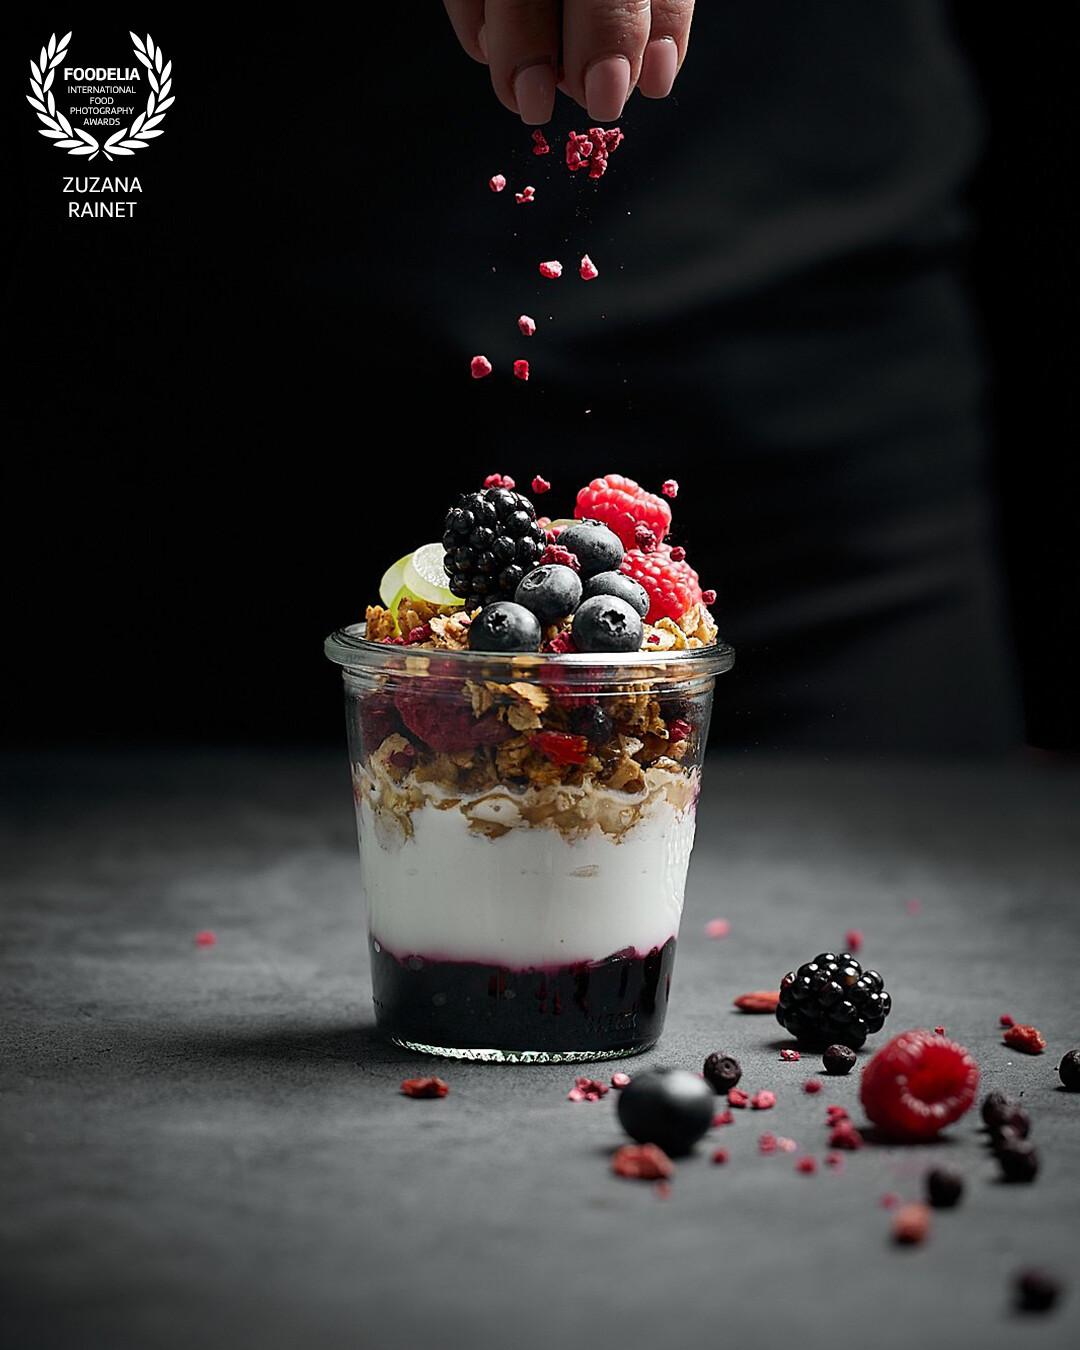 This image was shot for a client producing granola. I focused on capturing the frozen movement of granulated raspberries to enhance the taste of morning treat. Shot with the studio flash light.